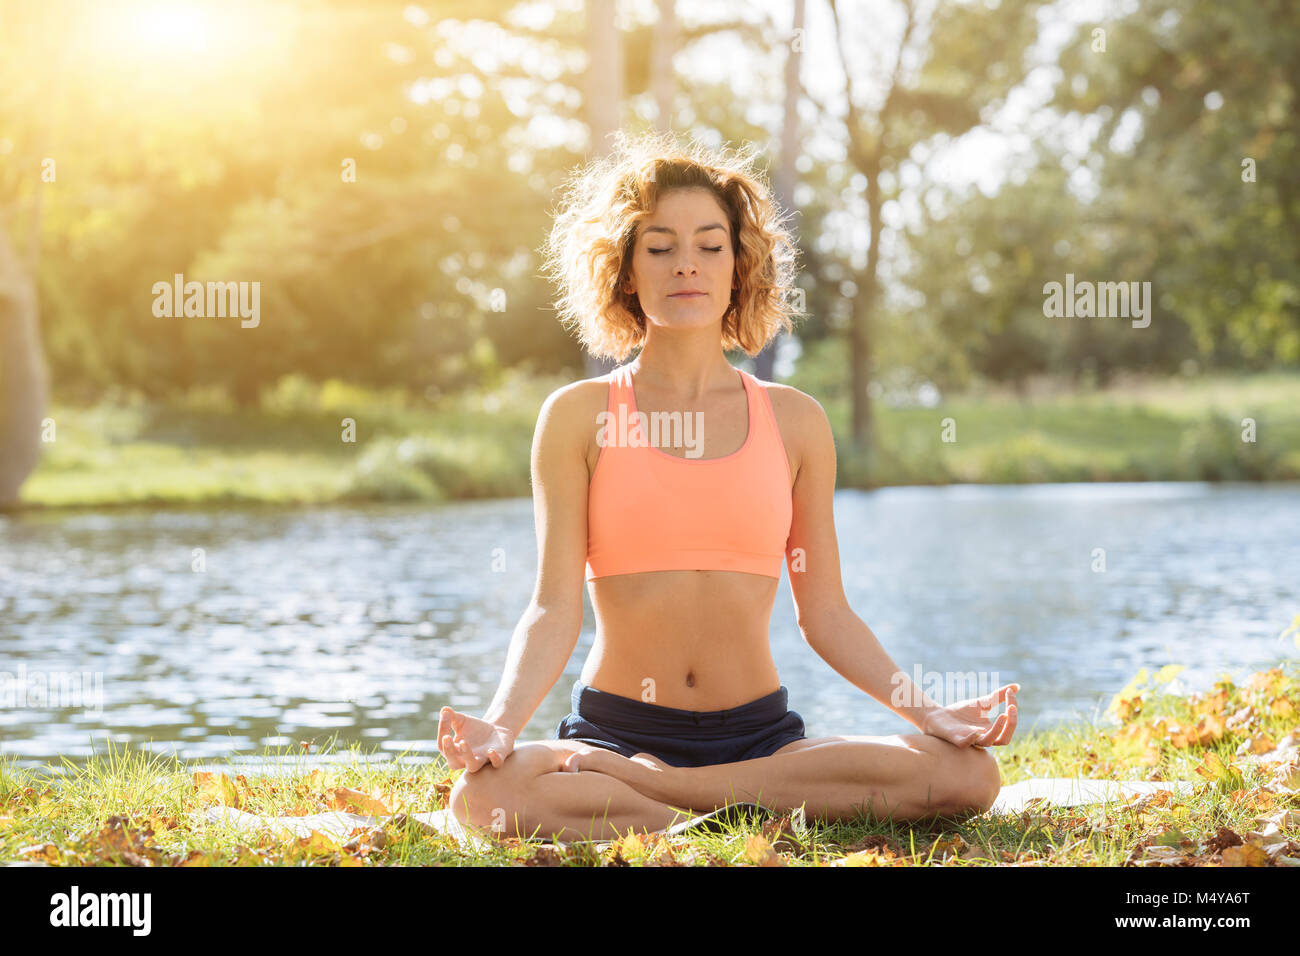 Young woman practicing yoga in nature. Stock Photo